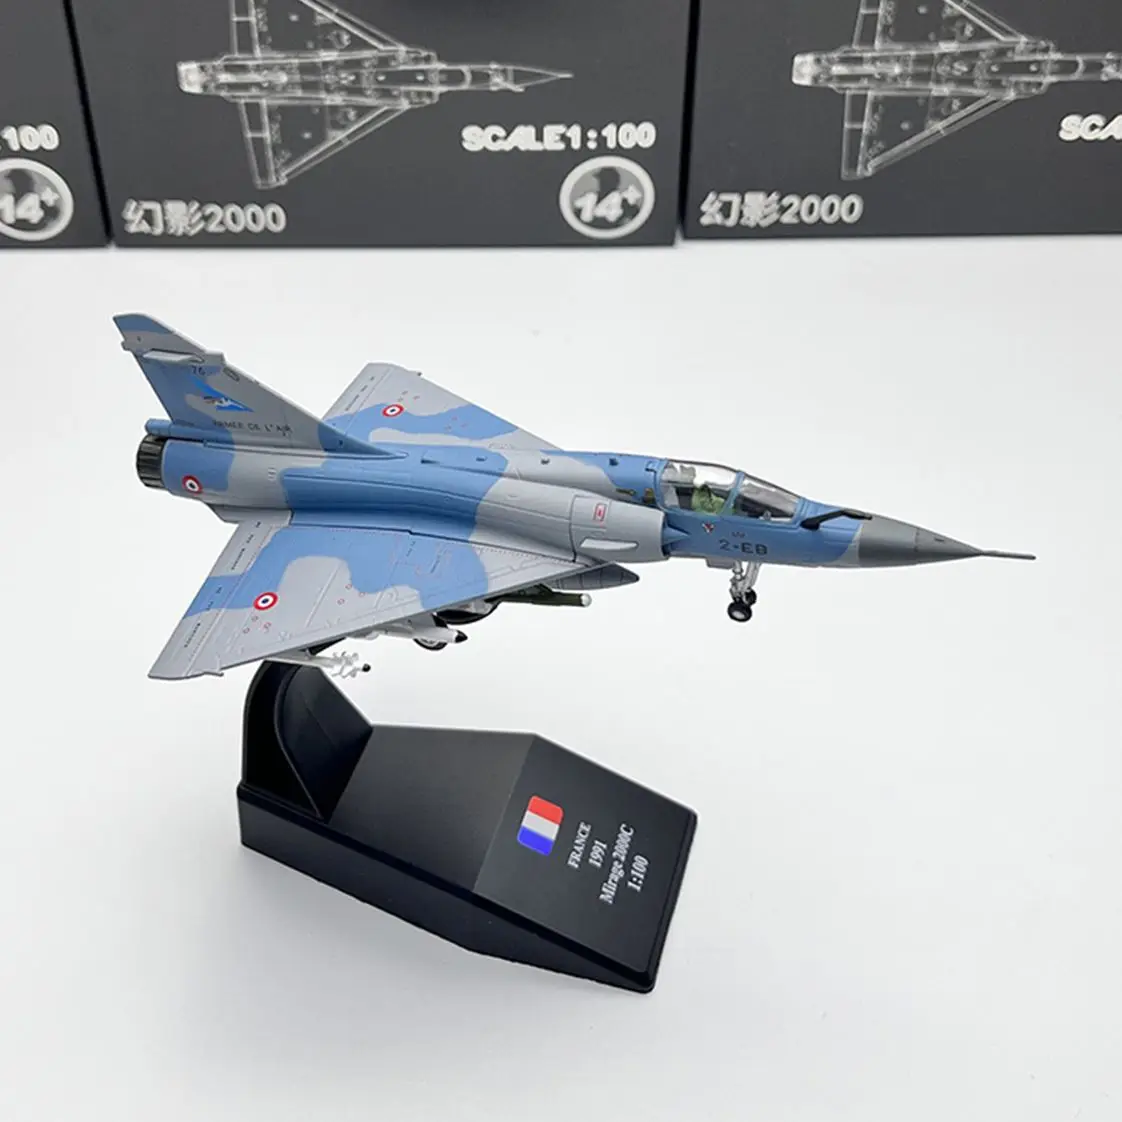 

Scale 1/100 Fighter Model France Dassault Mirage 2000 Military Aircraft Replica Aviation World War Plane Miniature Toy for Boy